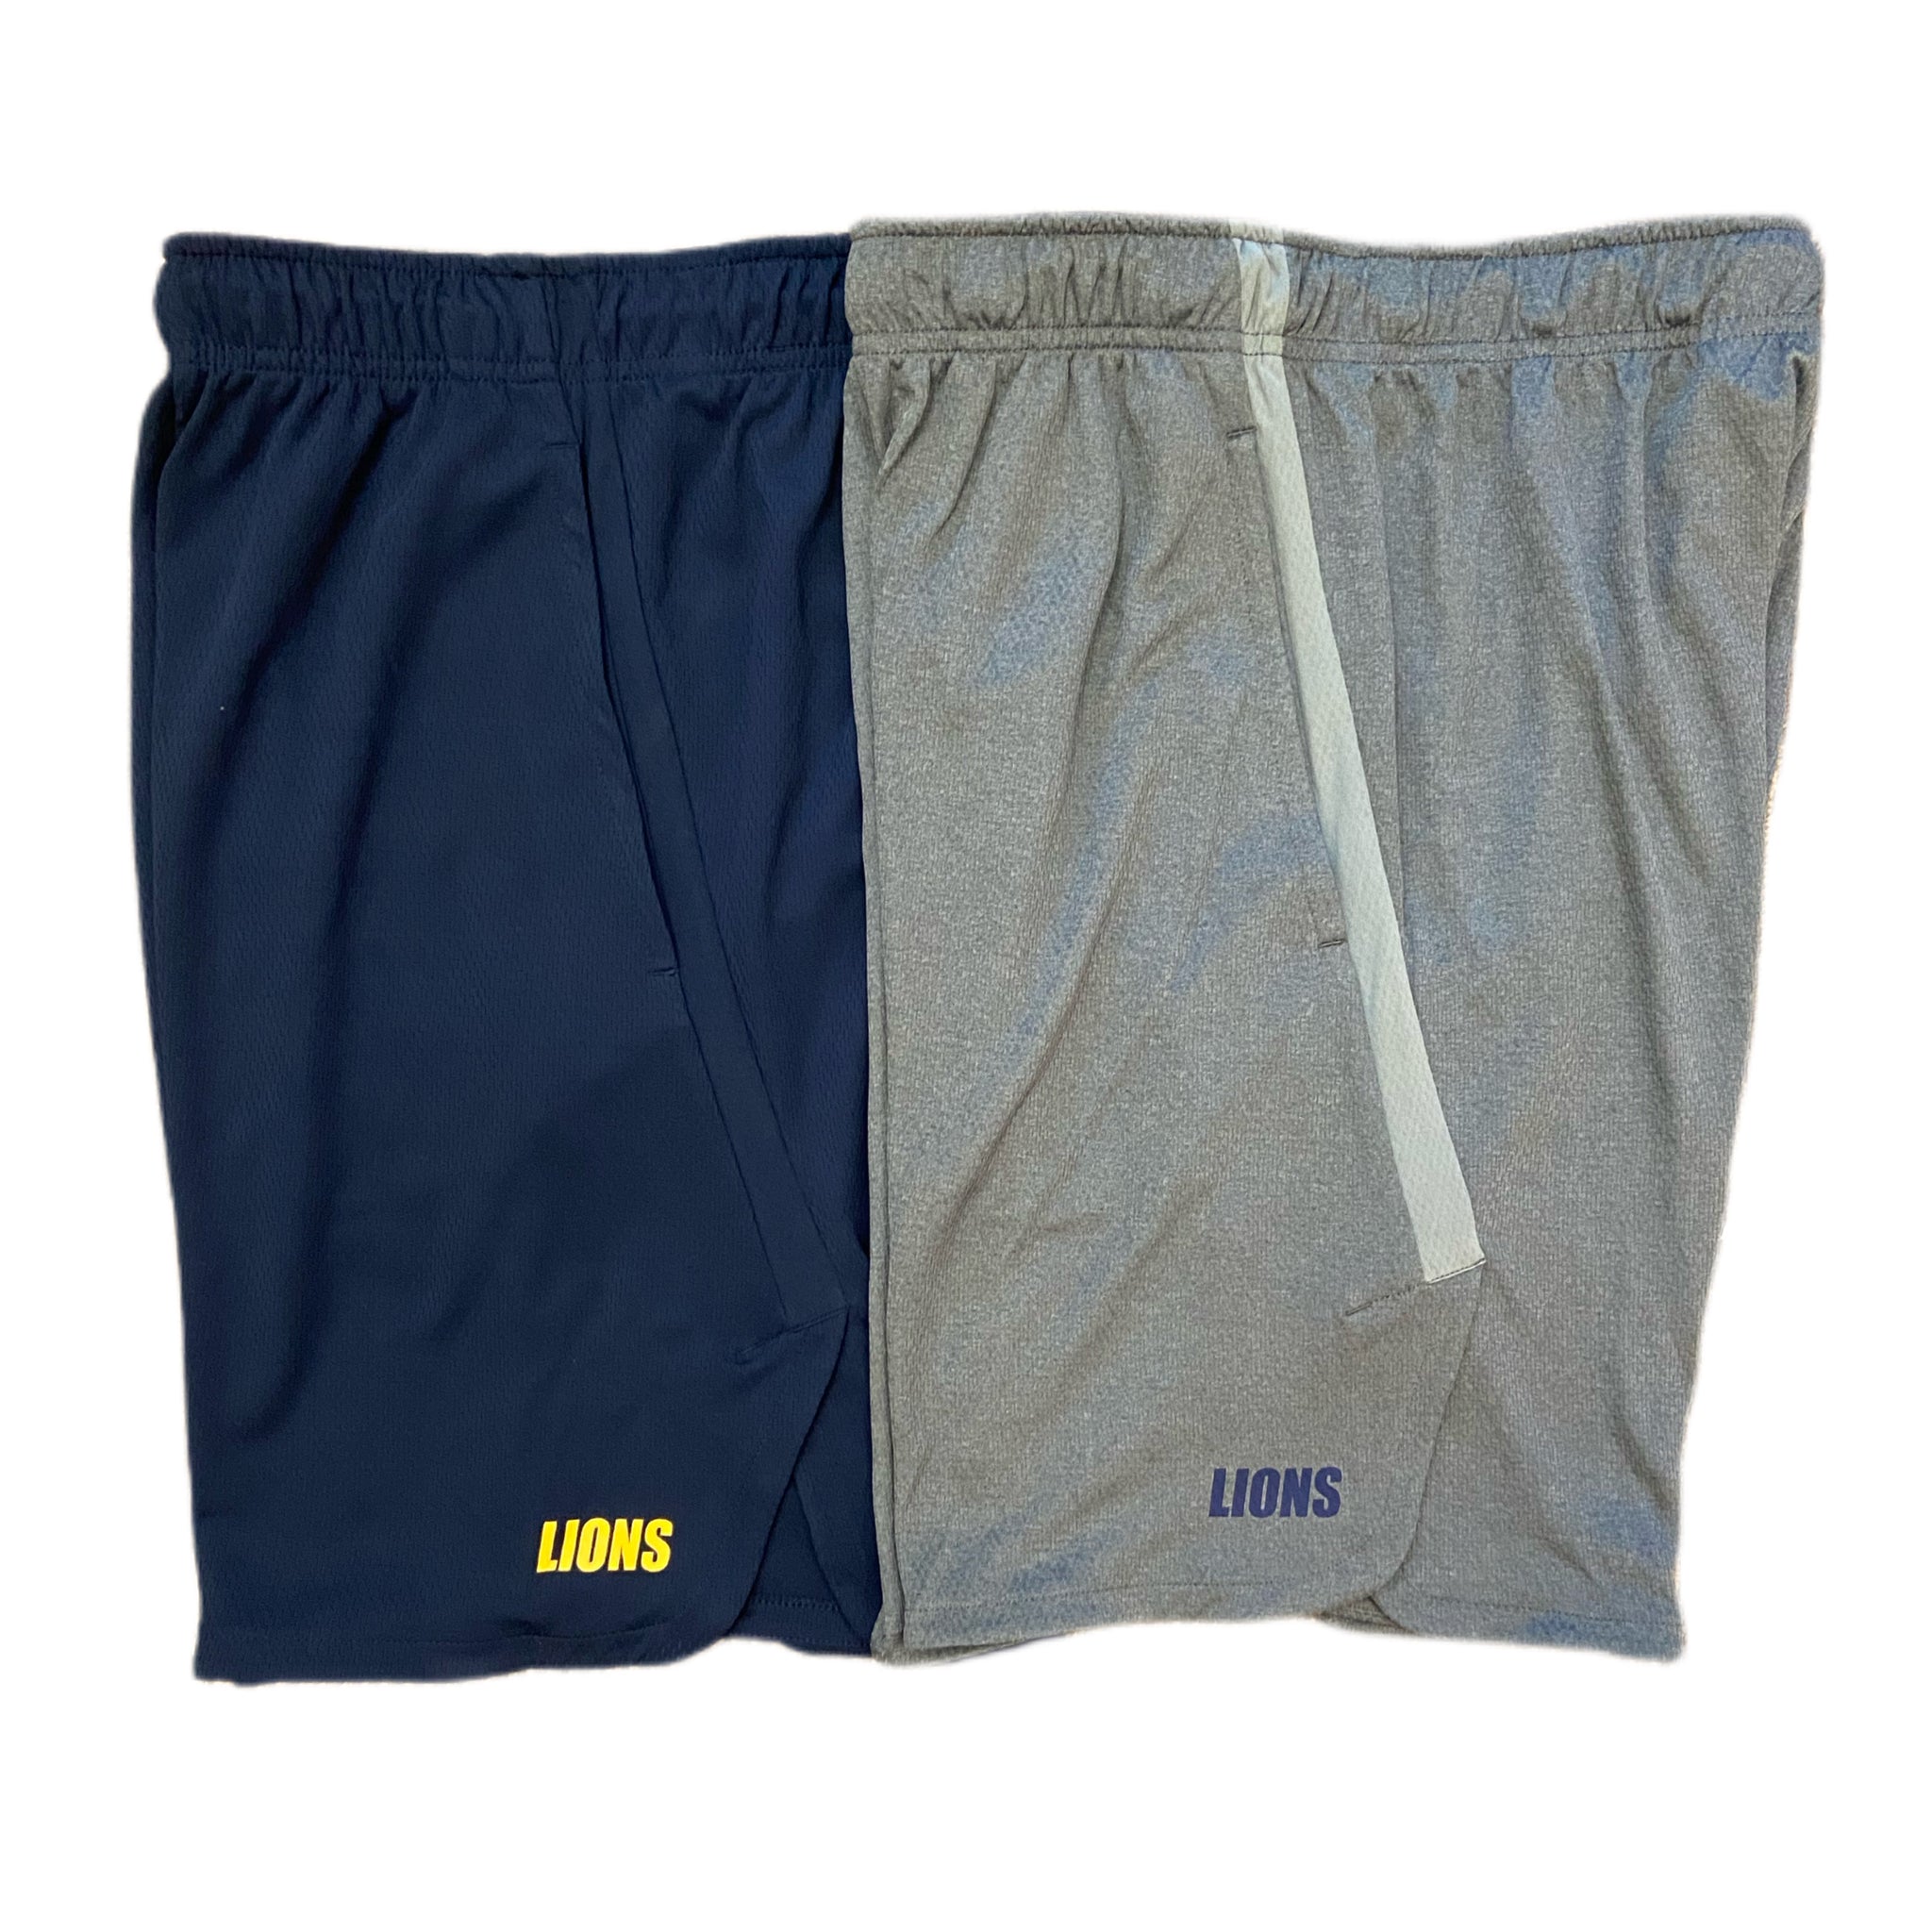 Nike Hype Short with LIONS